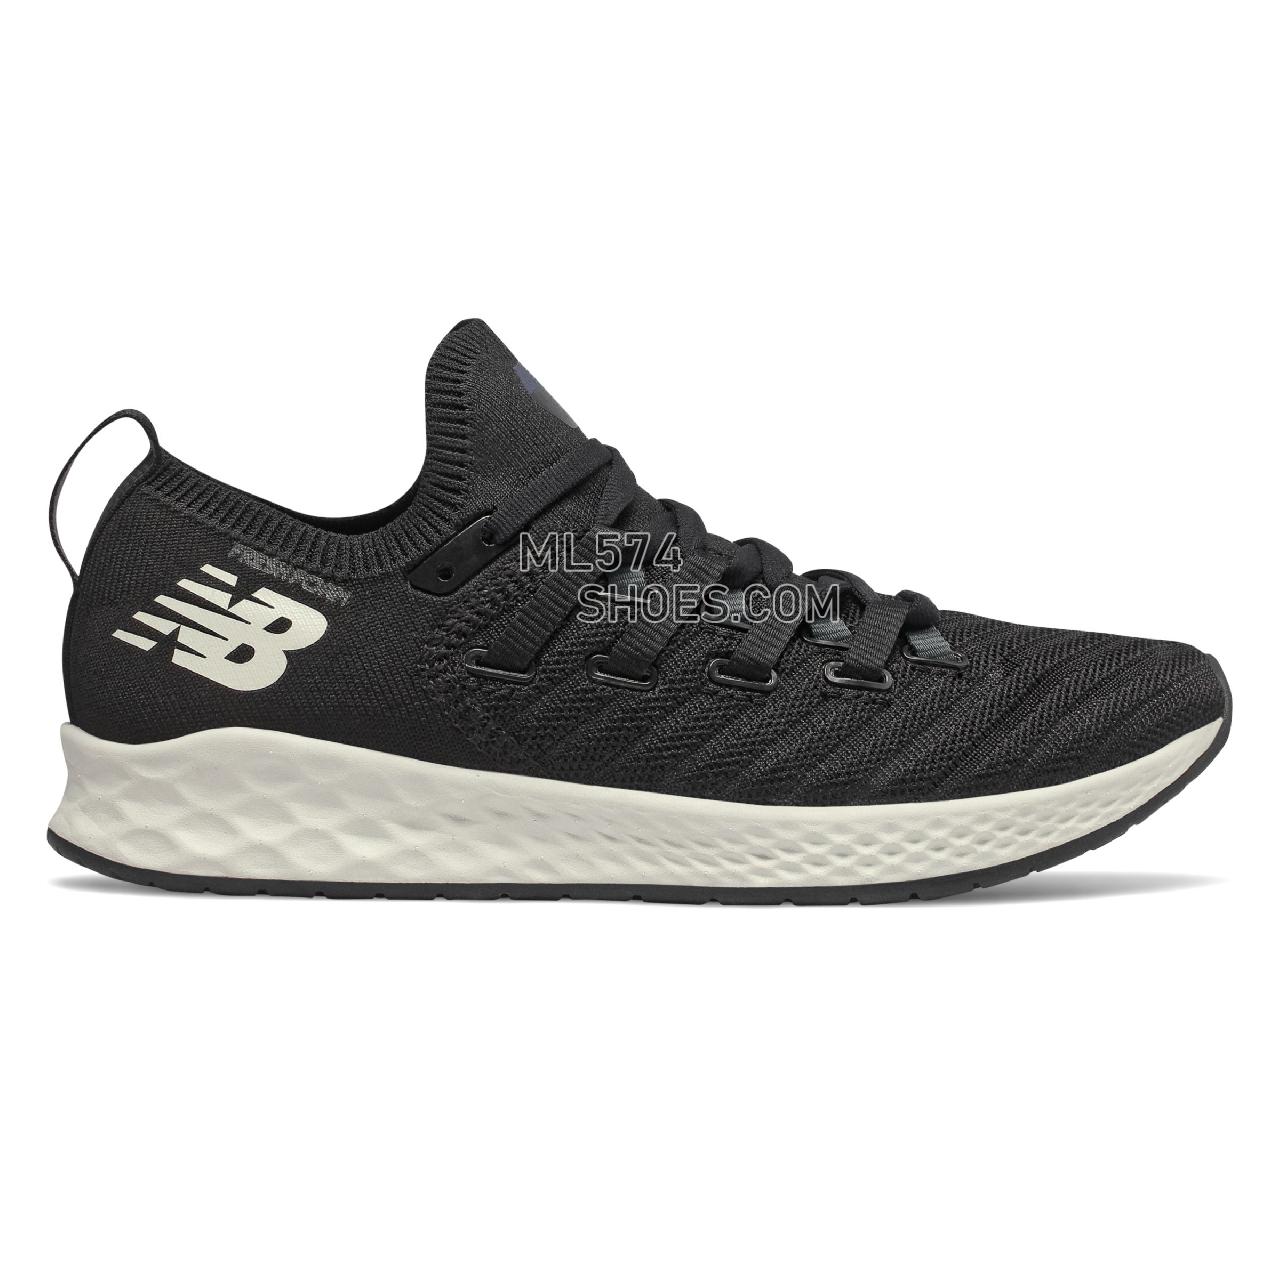 New Balance Fresh Foam Zante Trainer - Women's Workout - Black with Orca and Sea Salt - WXZNTLB